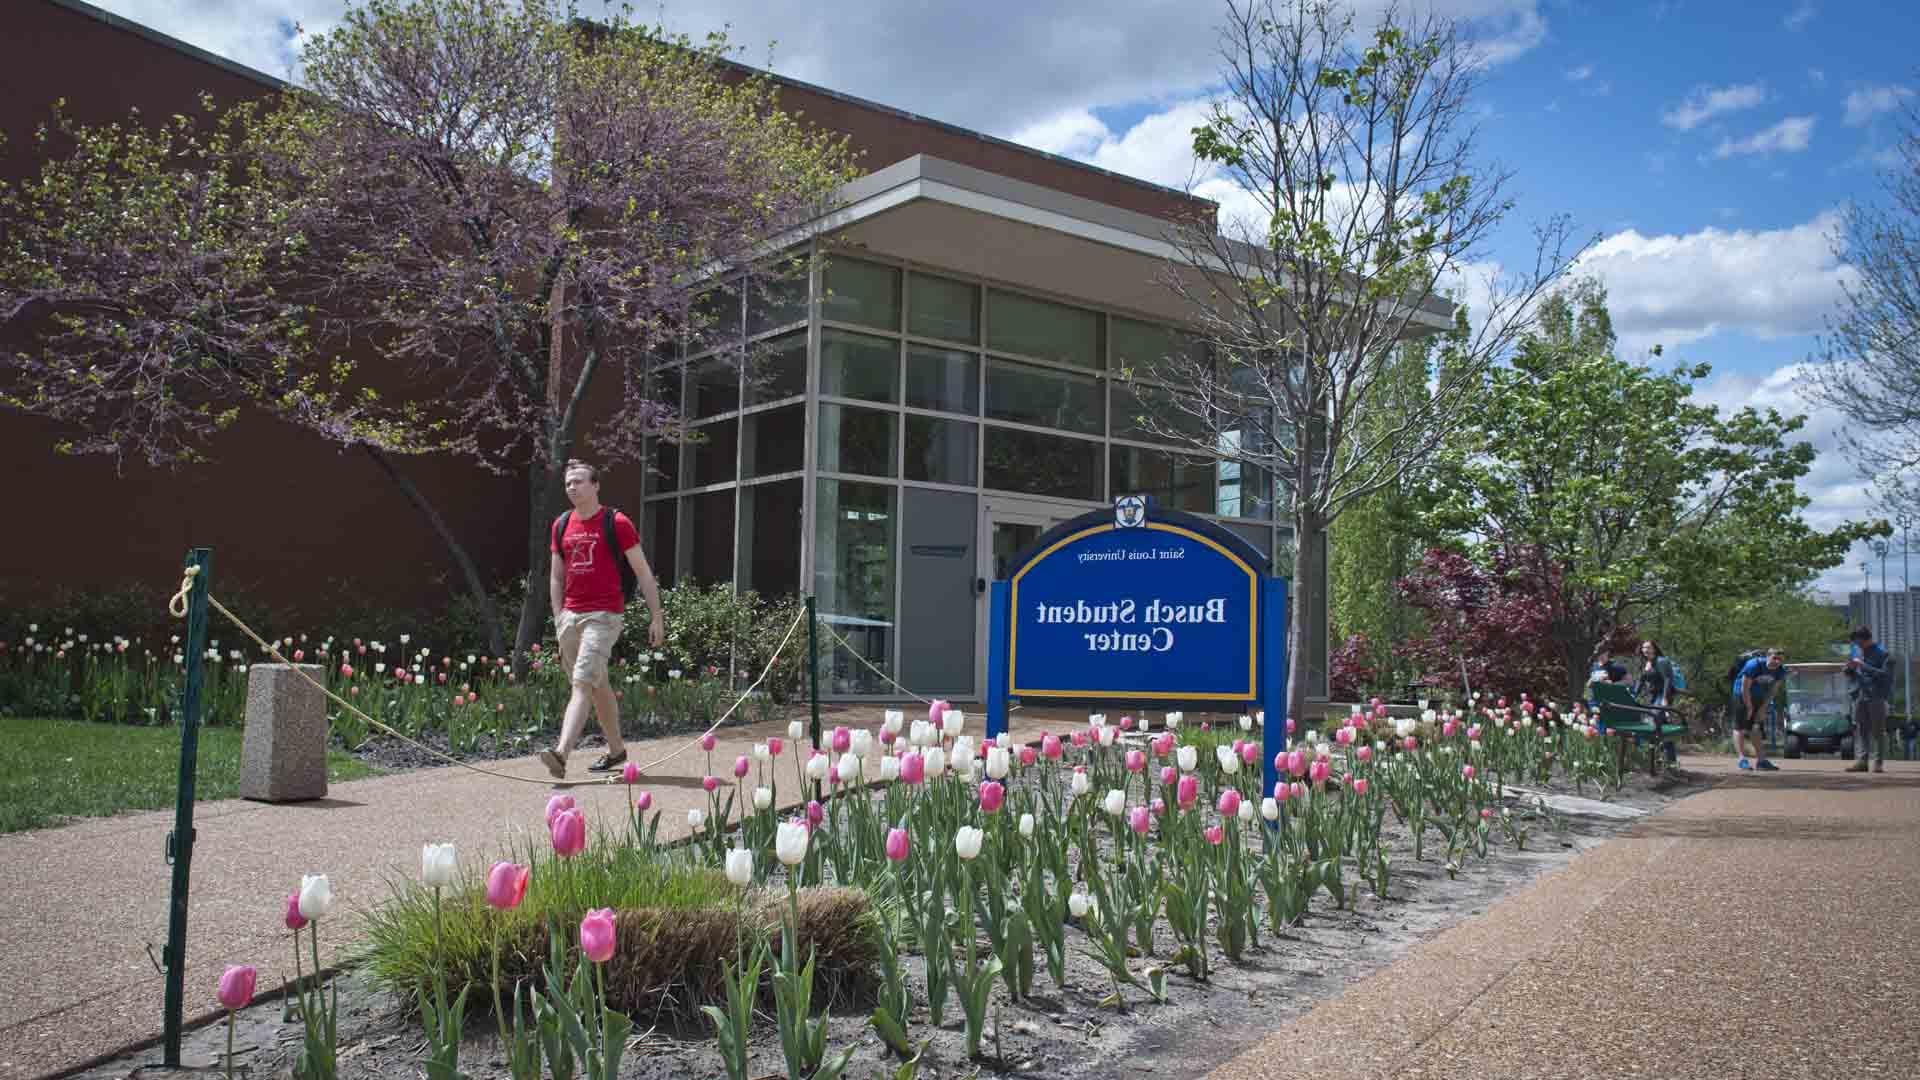 Exterior of the Busch Student Center with a student walking by and flowers blooming.